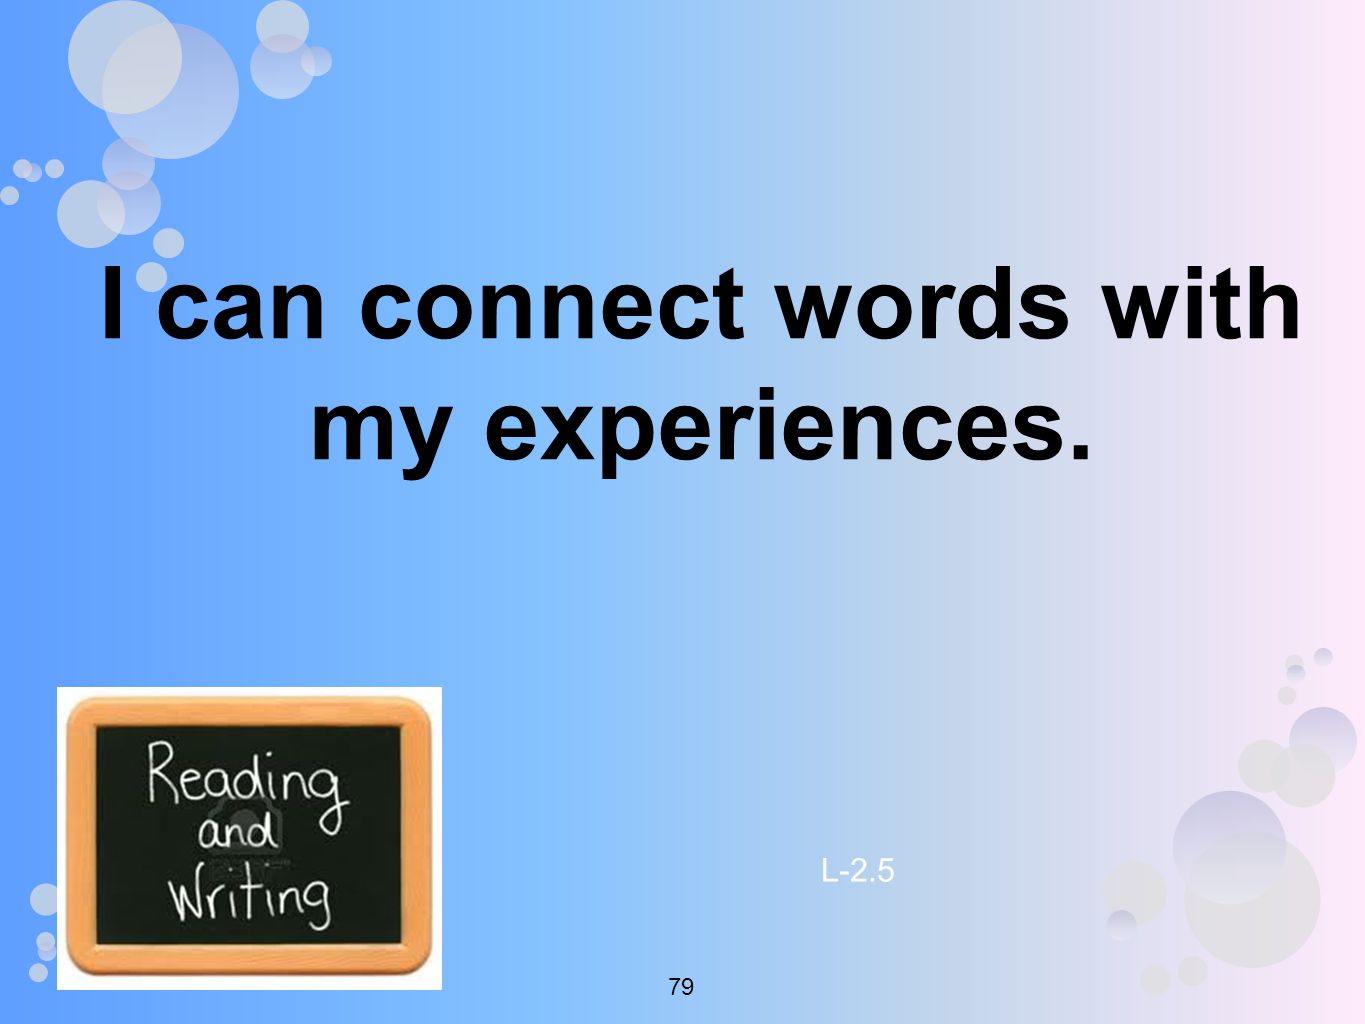 I can connect words with my experiences. L